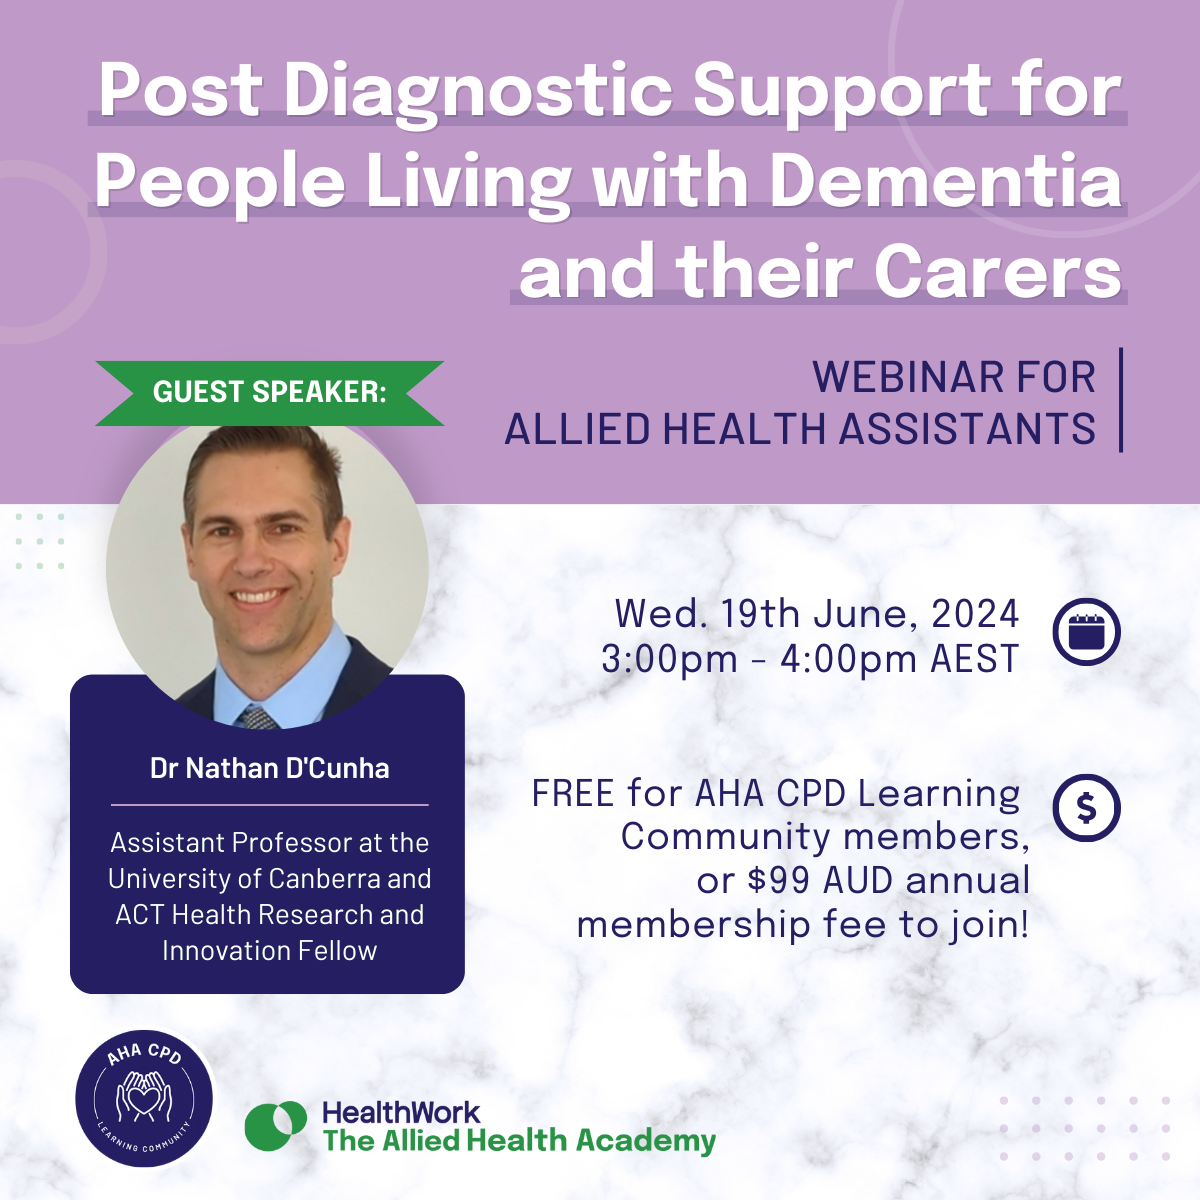 Post Diagnostic Support for People Living with Dementia and their Carers - CPD Webinar for Allied Health Assistants